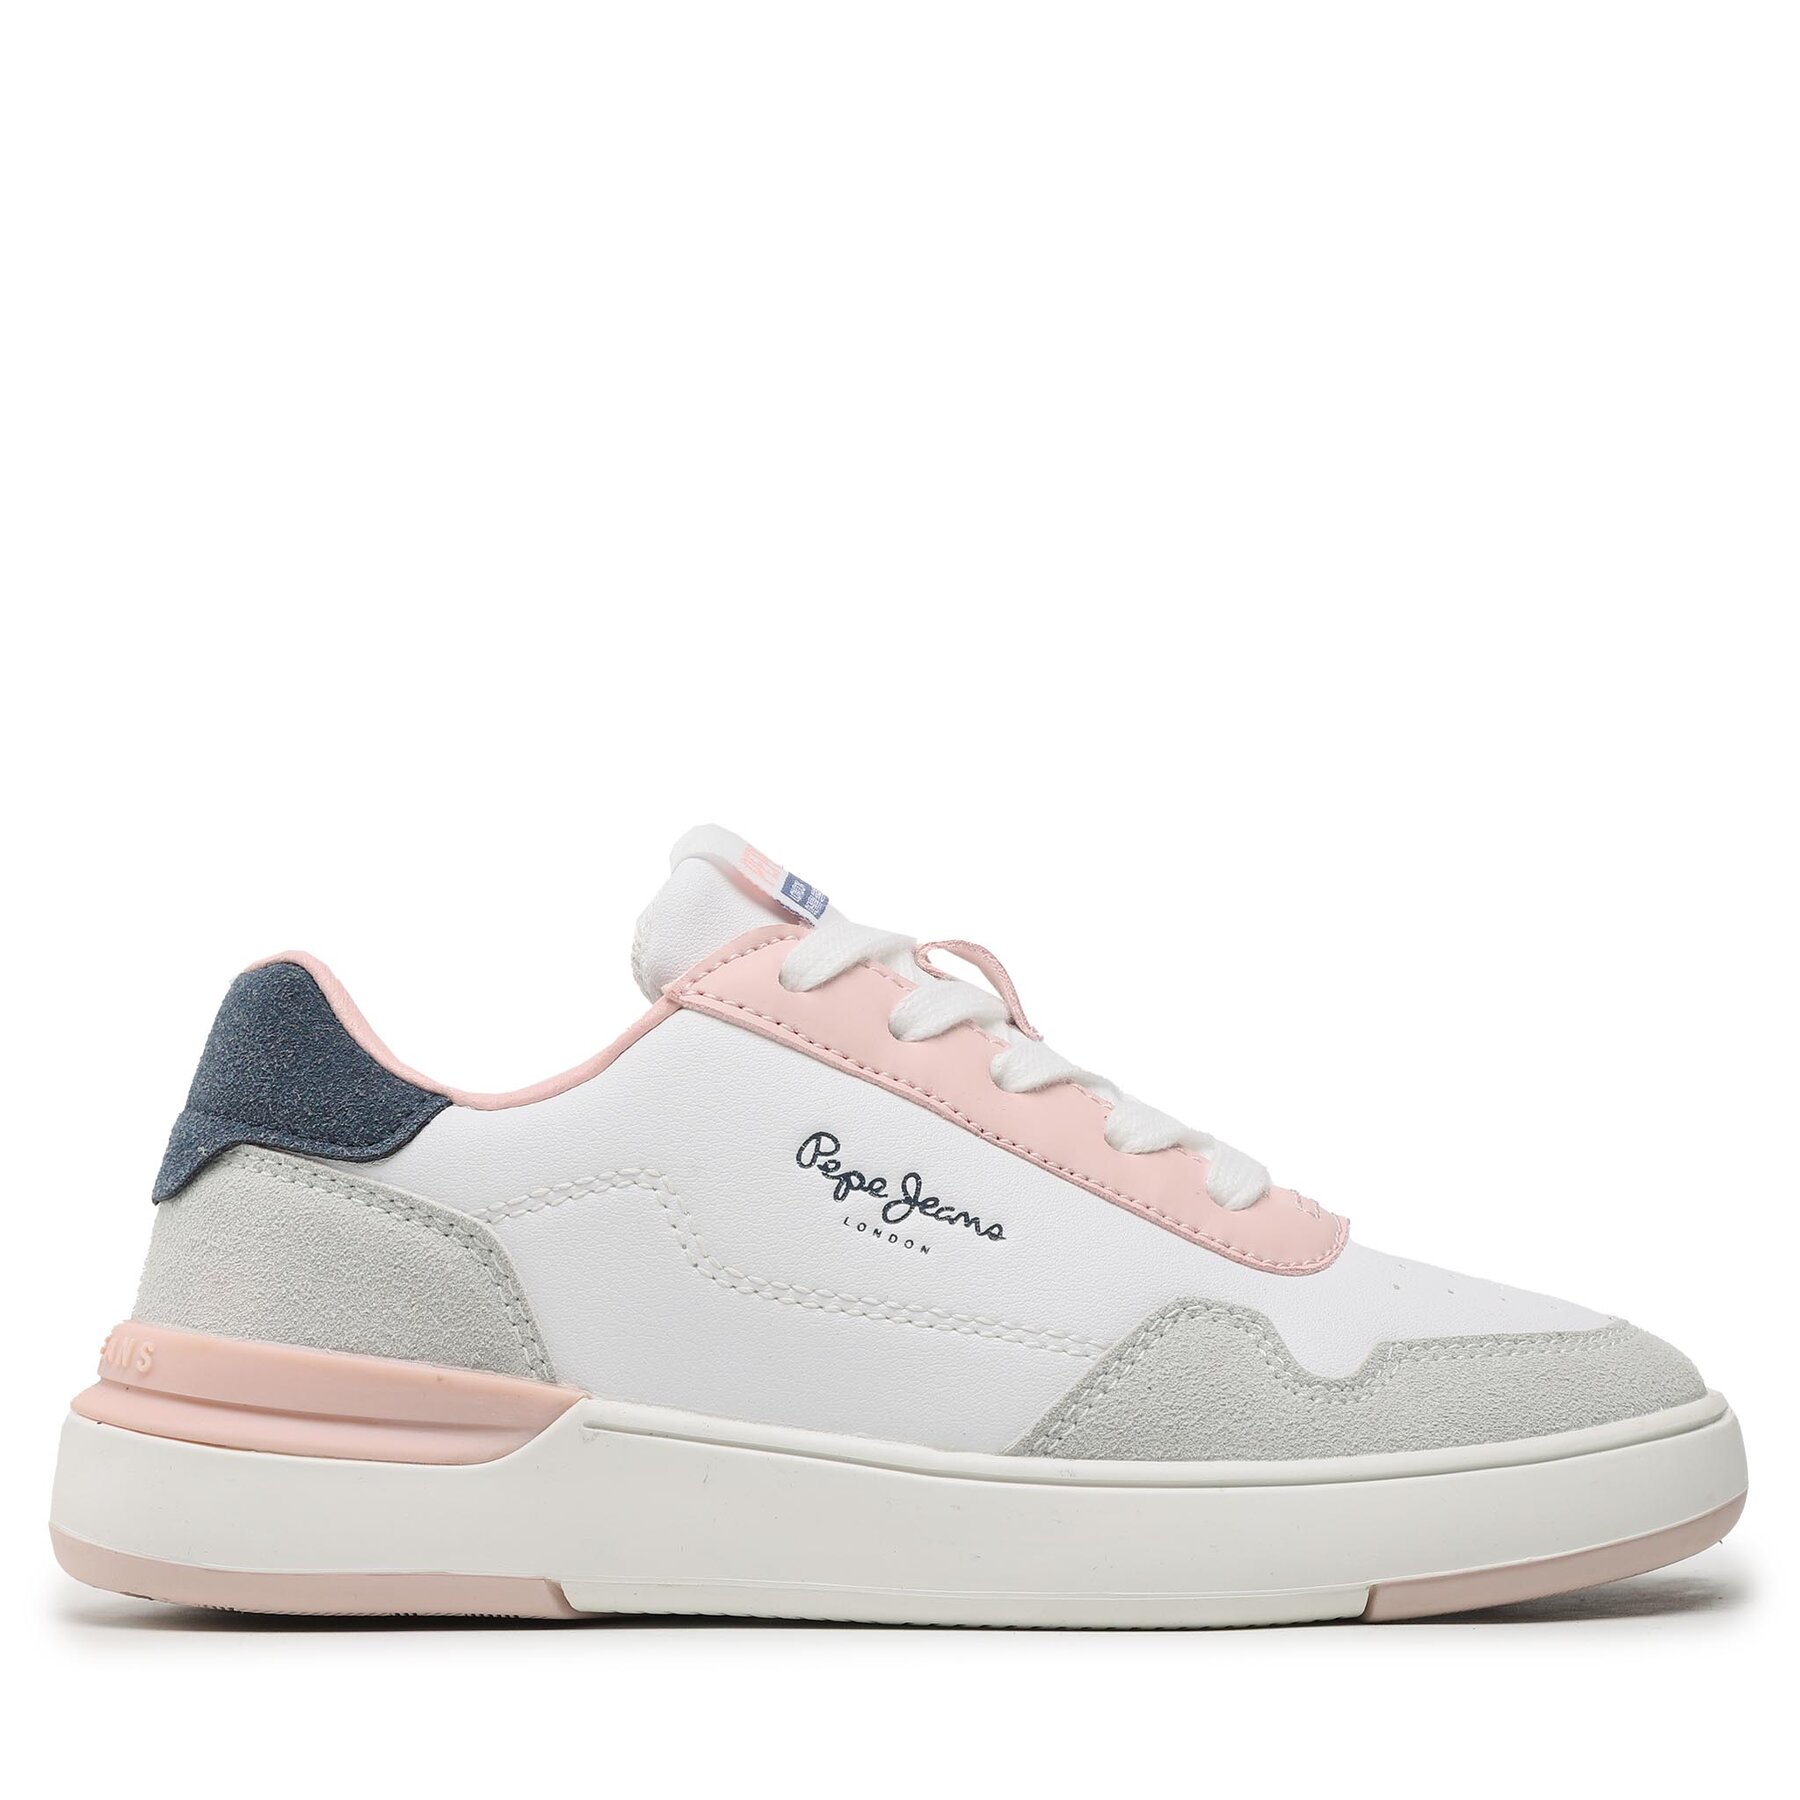 Sneakers Pepe Jeans Baxter Basic G PGS30579 Weiß von Pepe Jeans